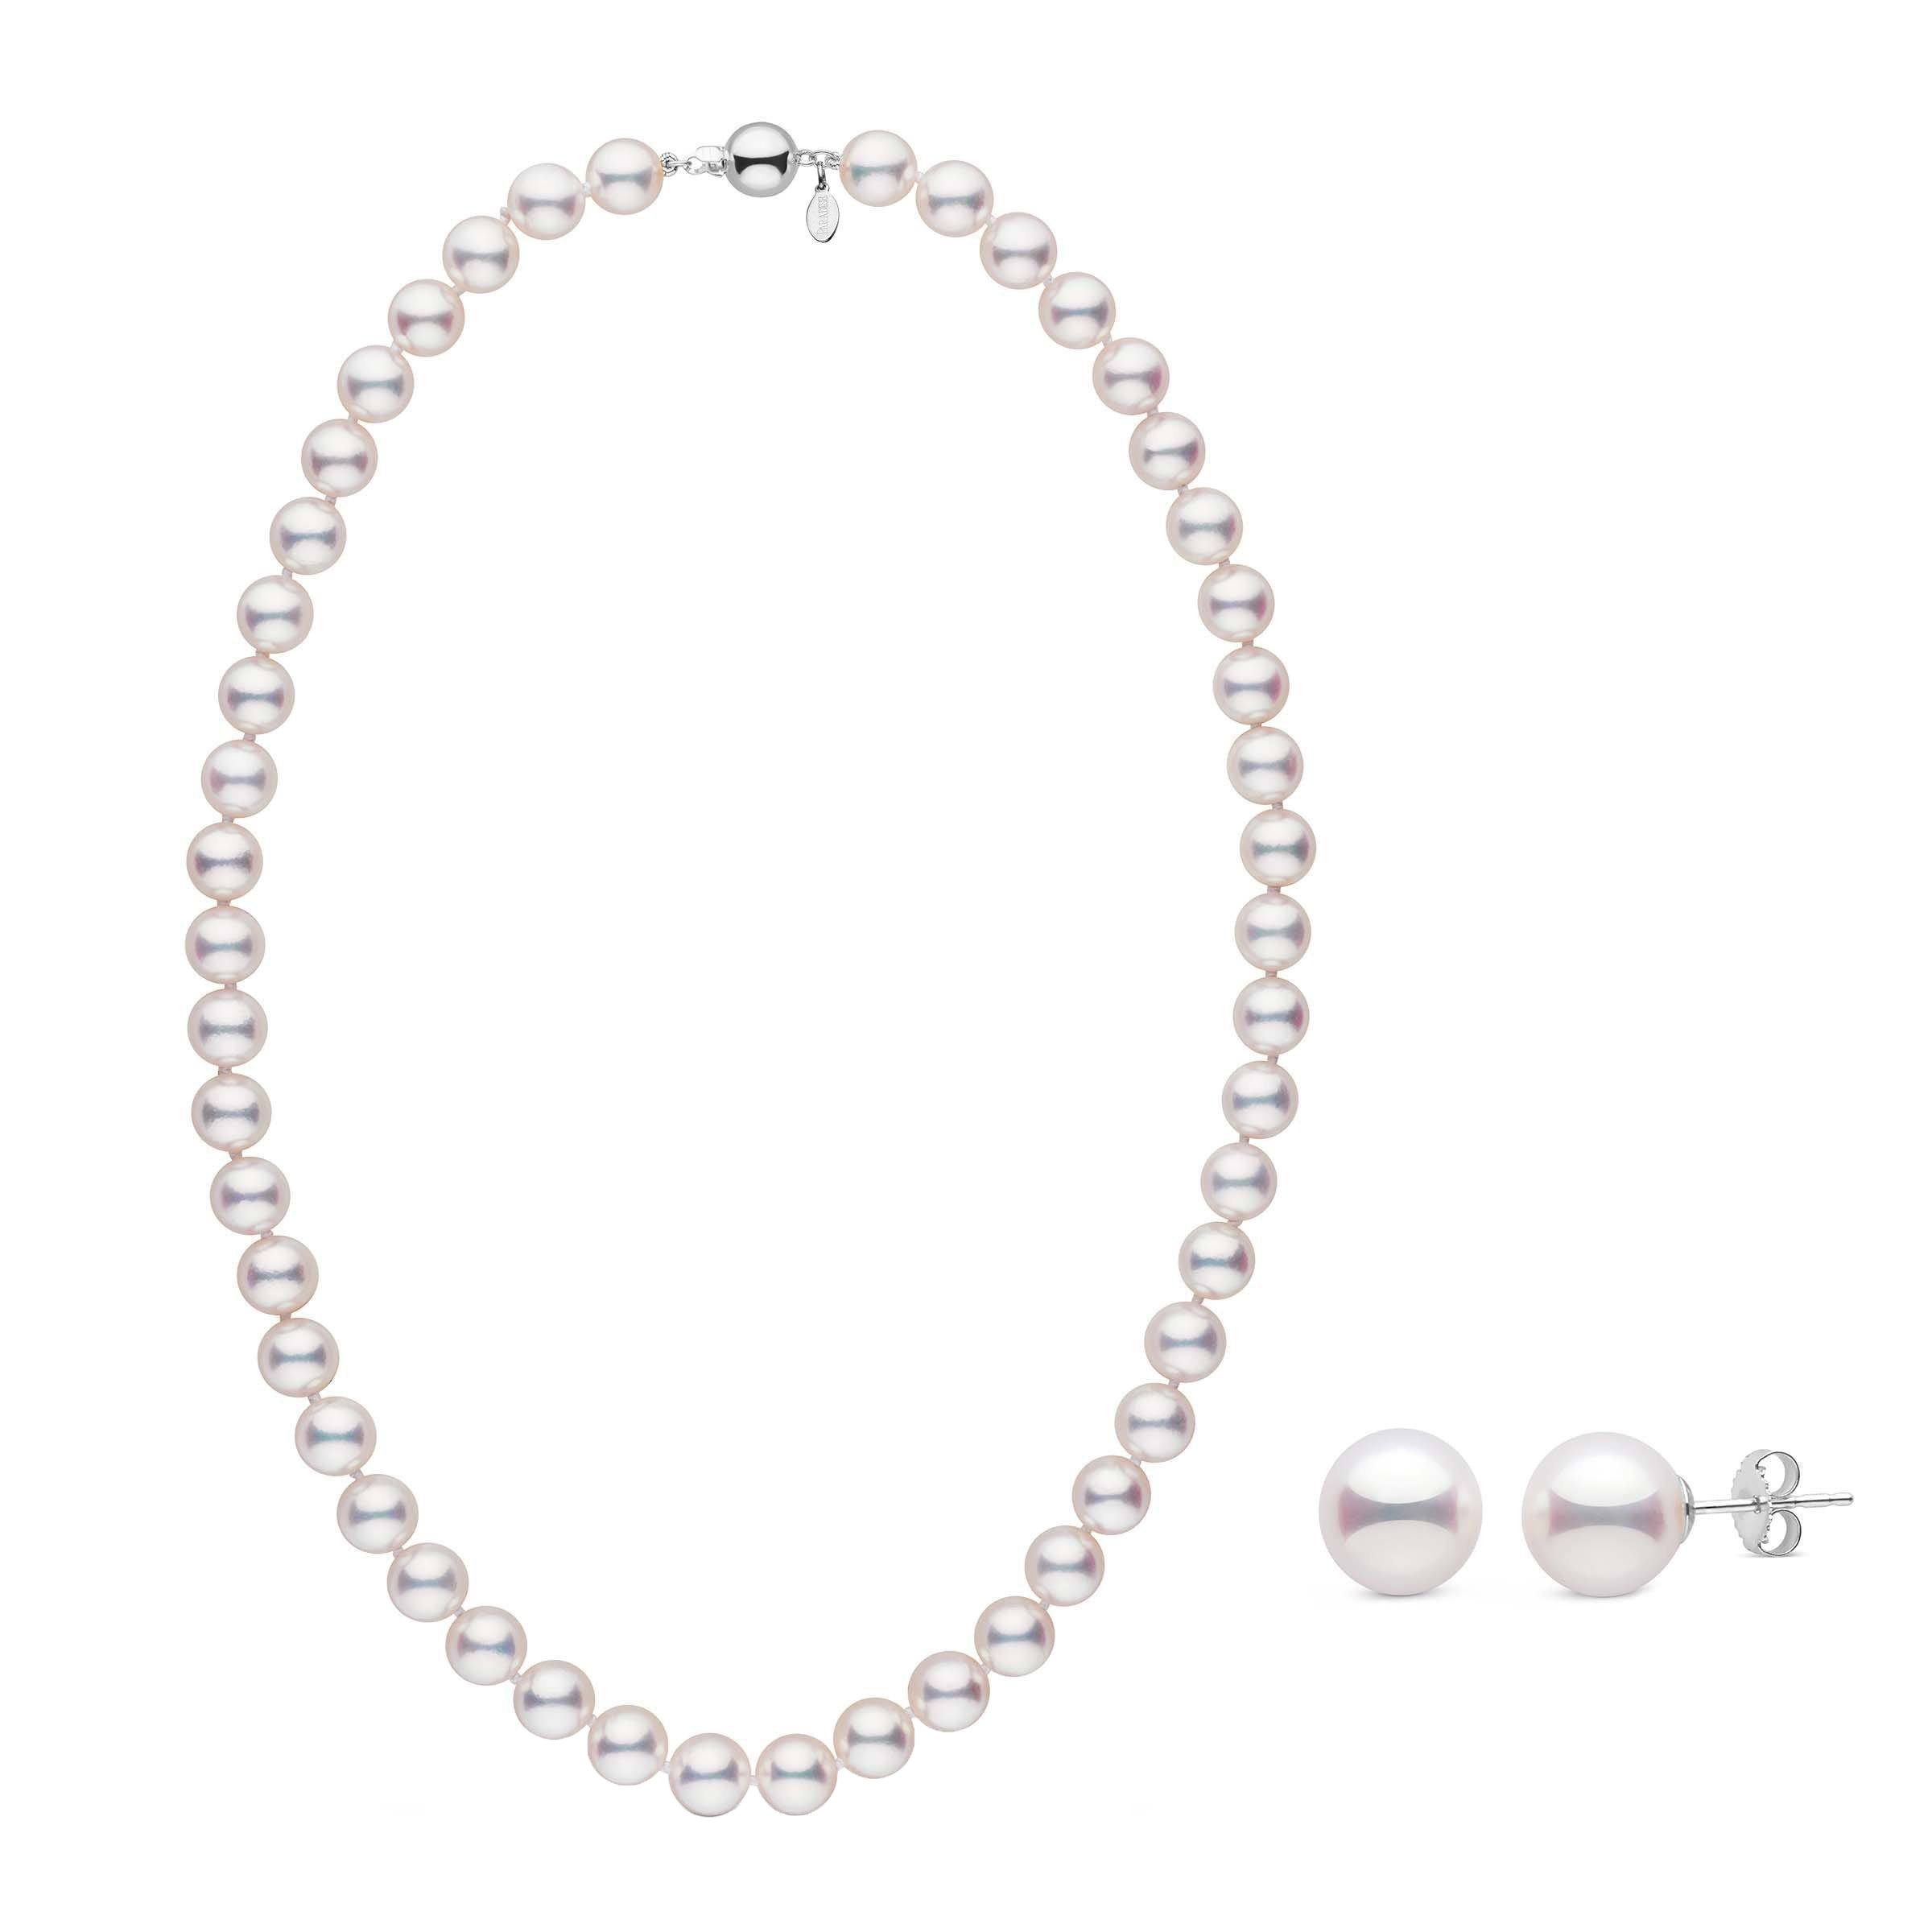 Certified 9.0-9.5 mm White Hanadama Akoya Pearl Set Necklace and Earrings in white gold